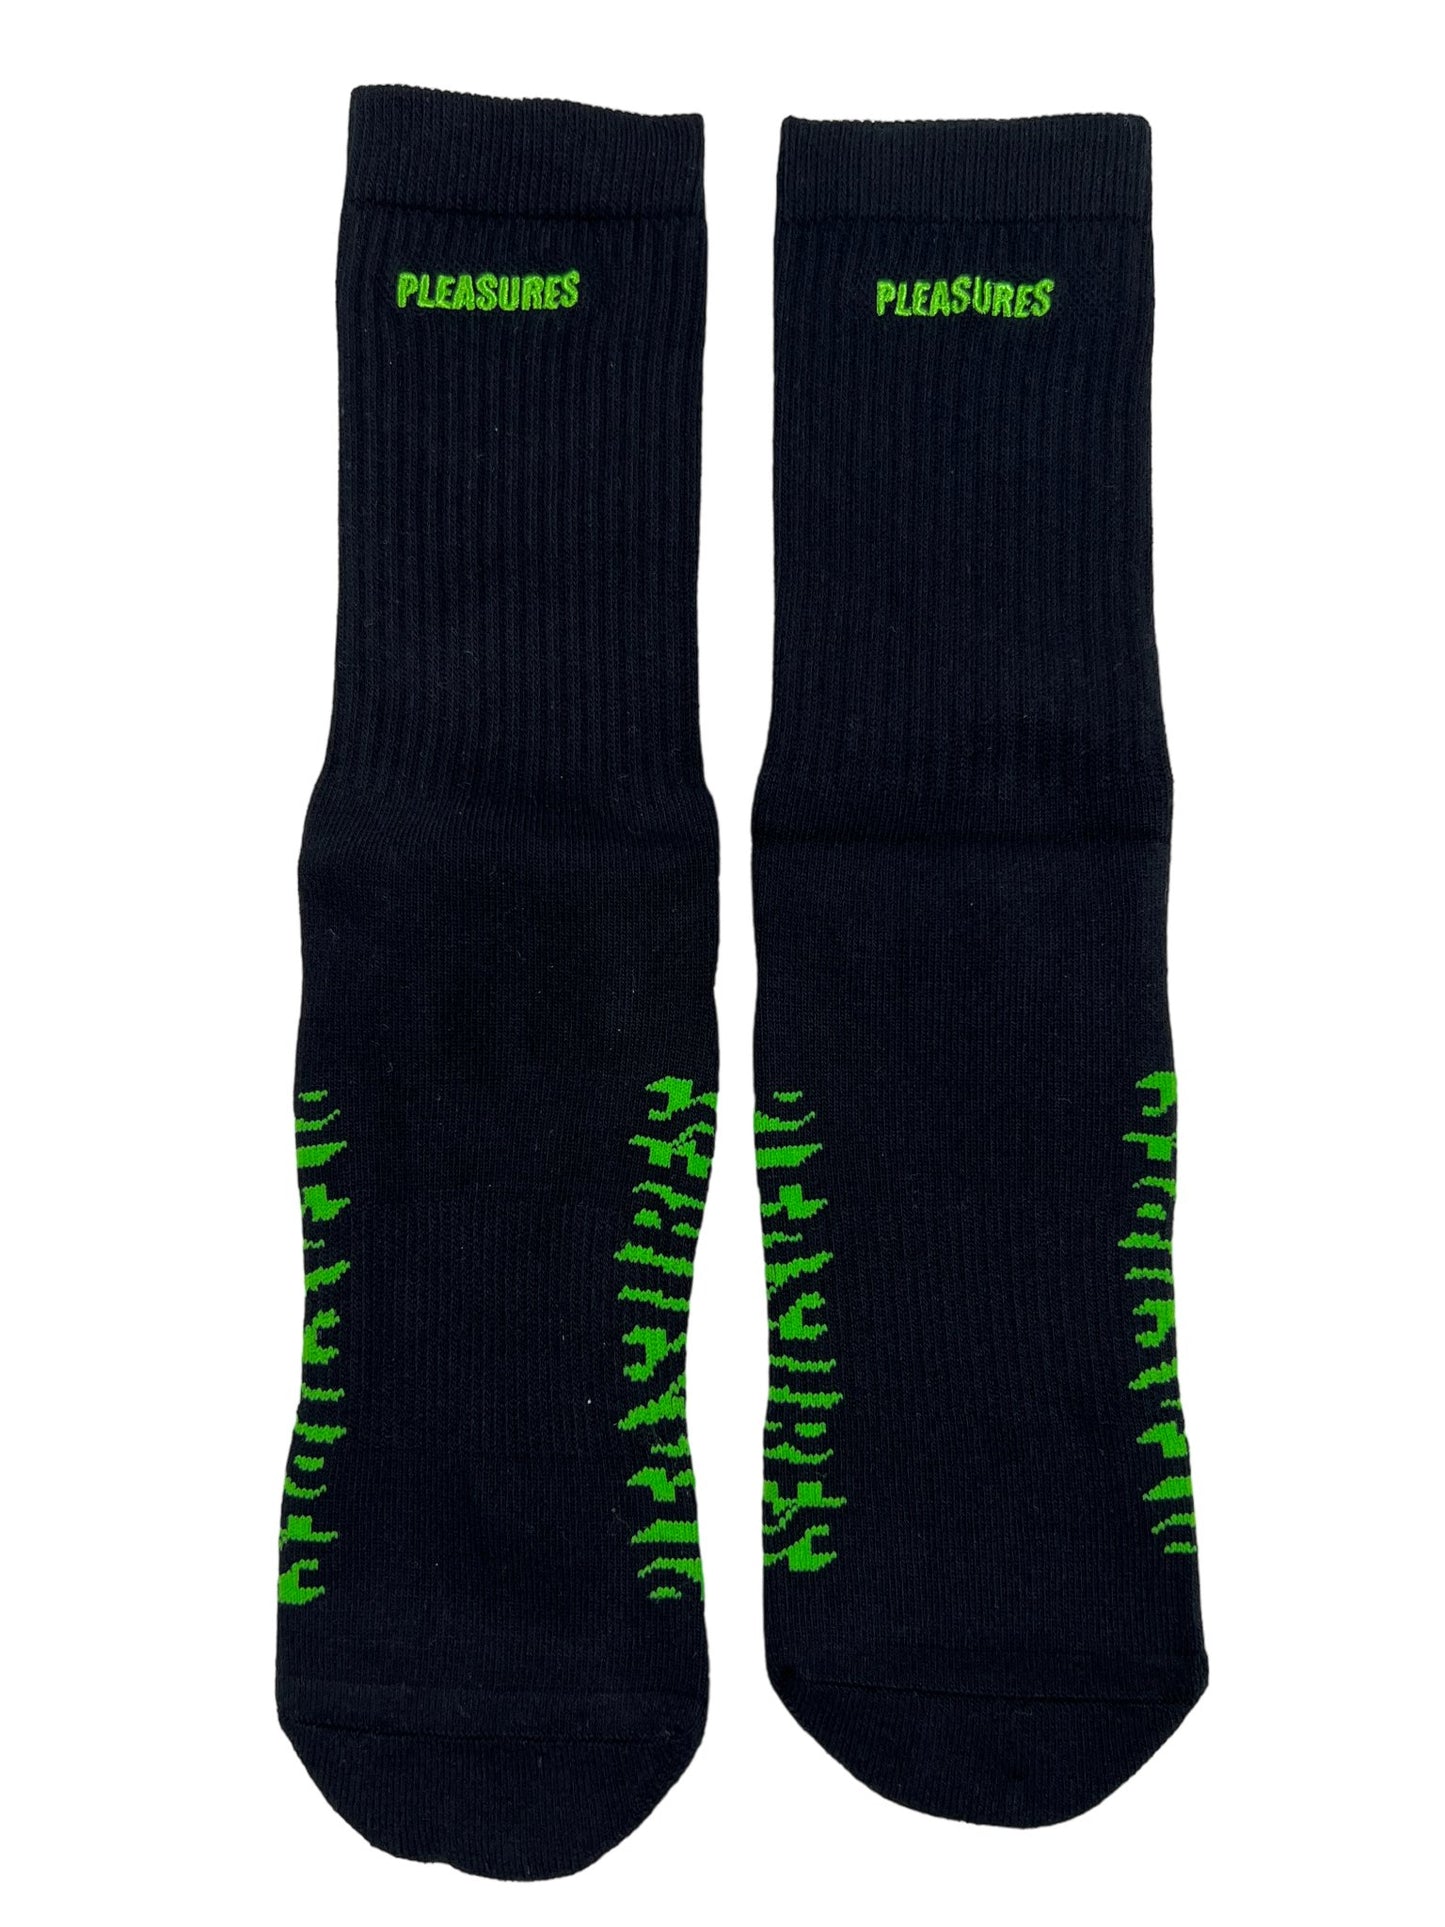 A pair of PLEASURES Knock Out Socks in black with green letters on them.